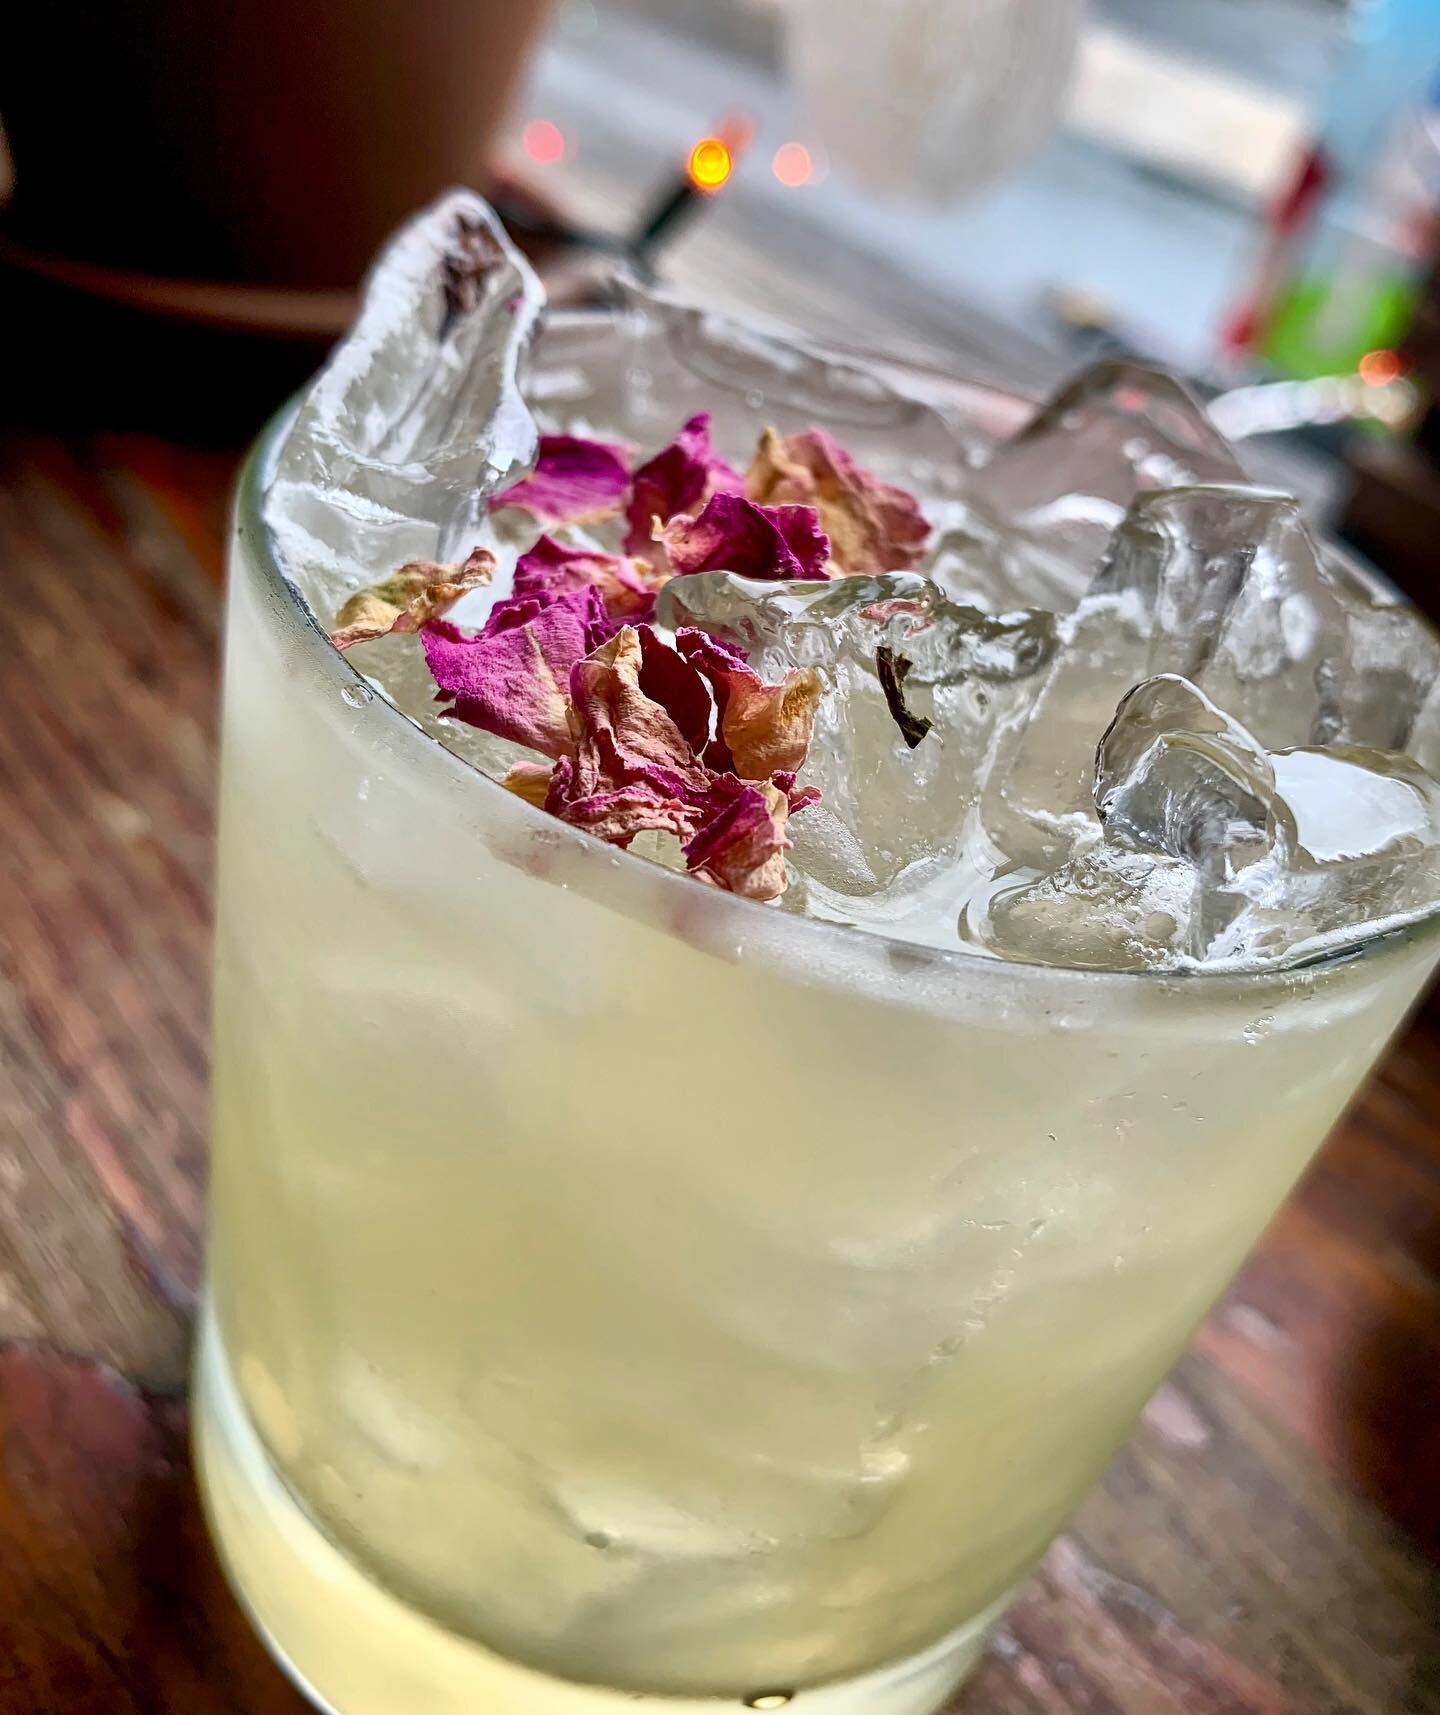 With All Due Respect🌹Vanilla vodka, orange liqueur, rosewater, lemon. Pretty and refreshing on this muggy day. ✨ #royaltavern #eastpassyunk #queenvillage #craftcocktails #drinkphilly